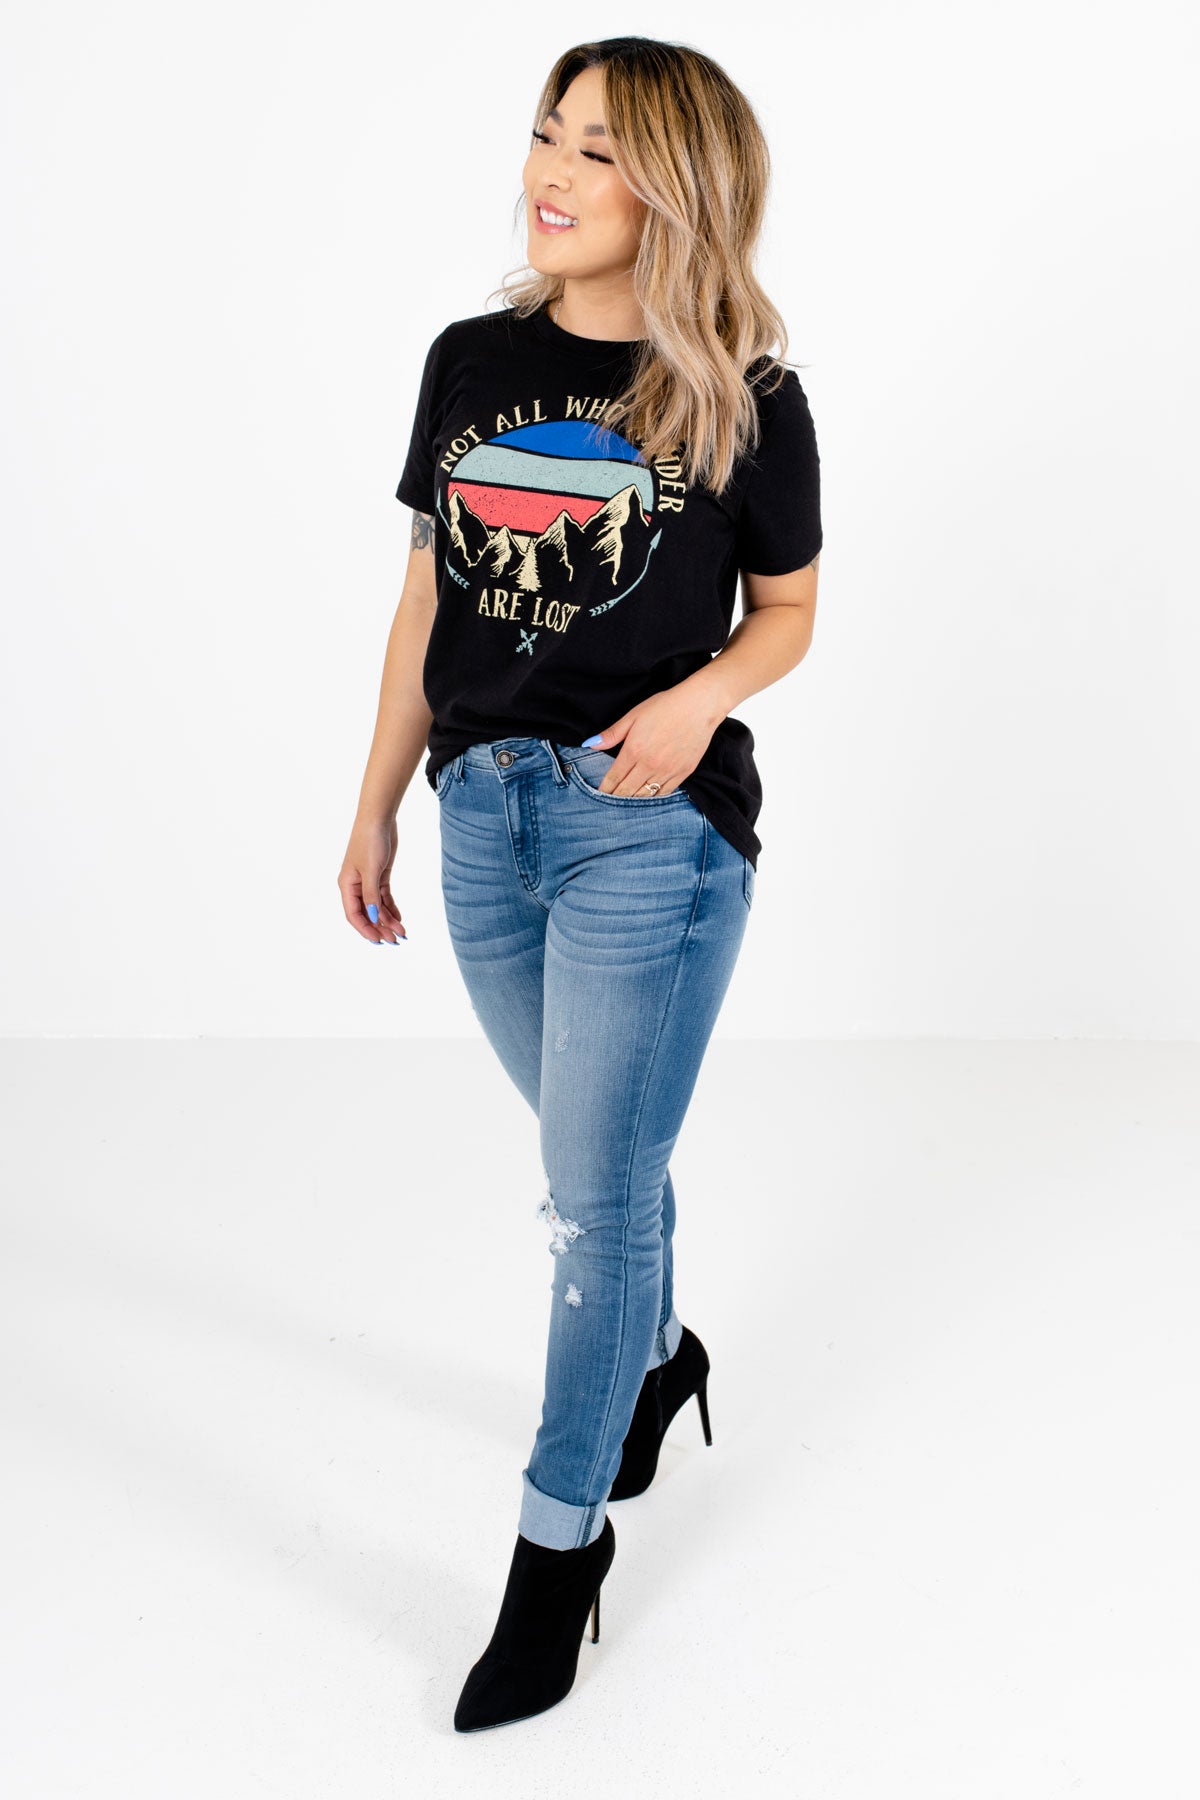 Women's Black High-Quality Material Boutique Tee